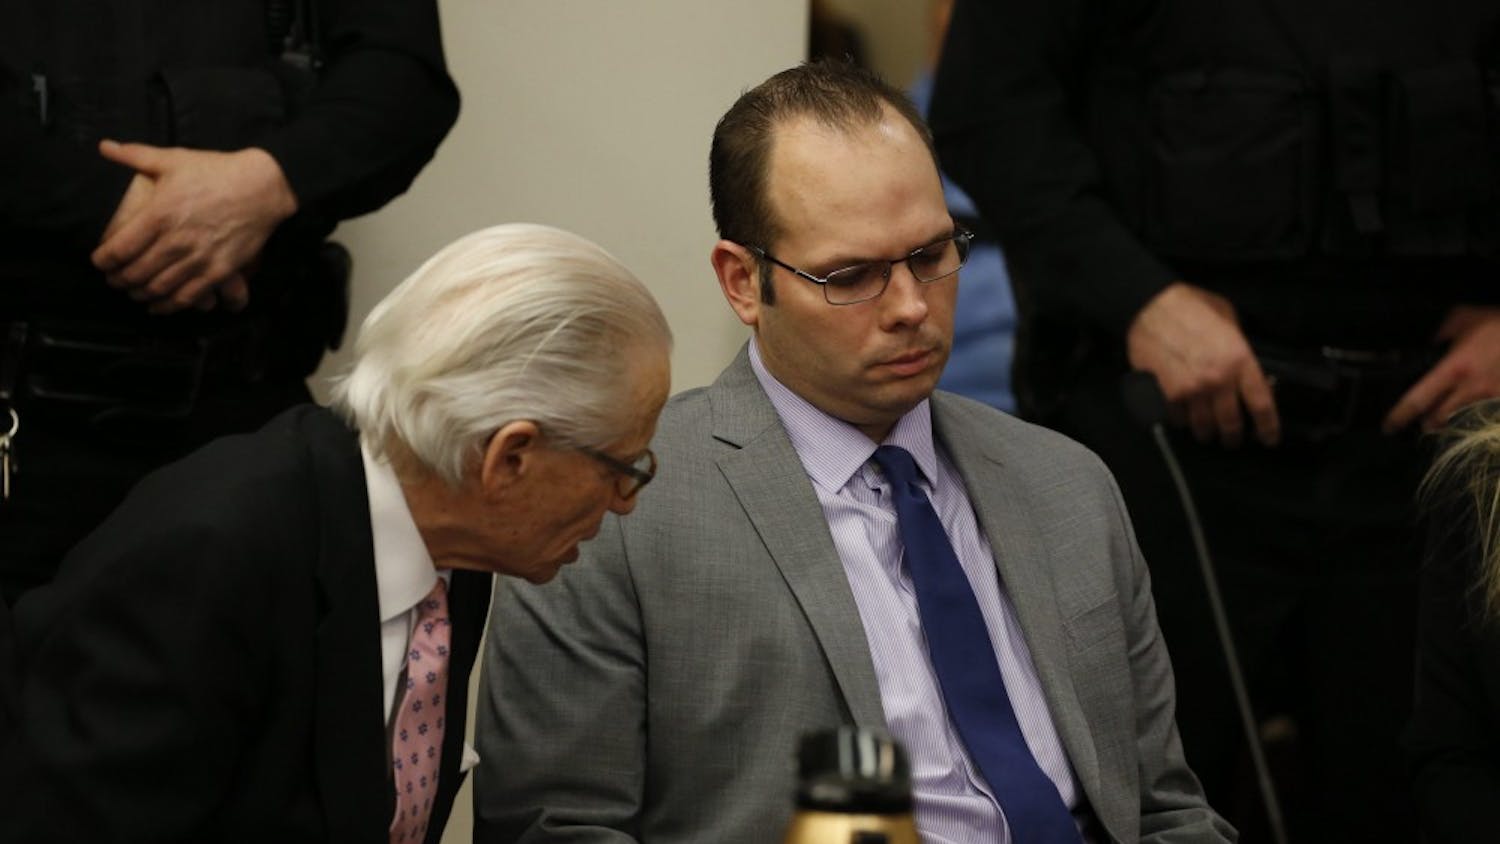 Jeffrey Basil, right, and his defense attorney Joel Daniels, left, react after Basil was found guilty of 2nd degree murder  and tampering with evidence on Wednesday, Jan. 21, 2015, by a jury presided over by Justice Penny M. Wolfgang in Erie County Court.  (John Hickey/Buffalo News, pool)